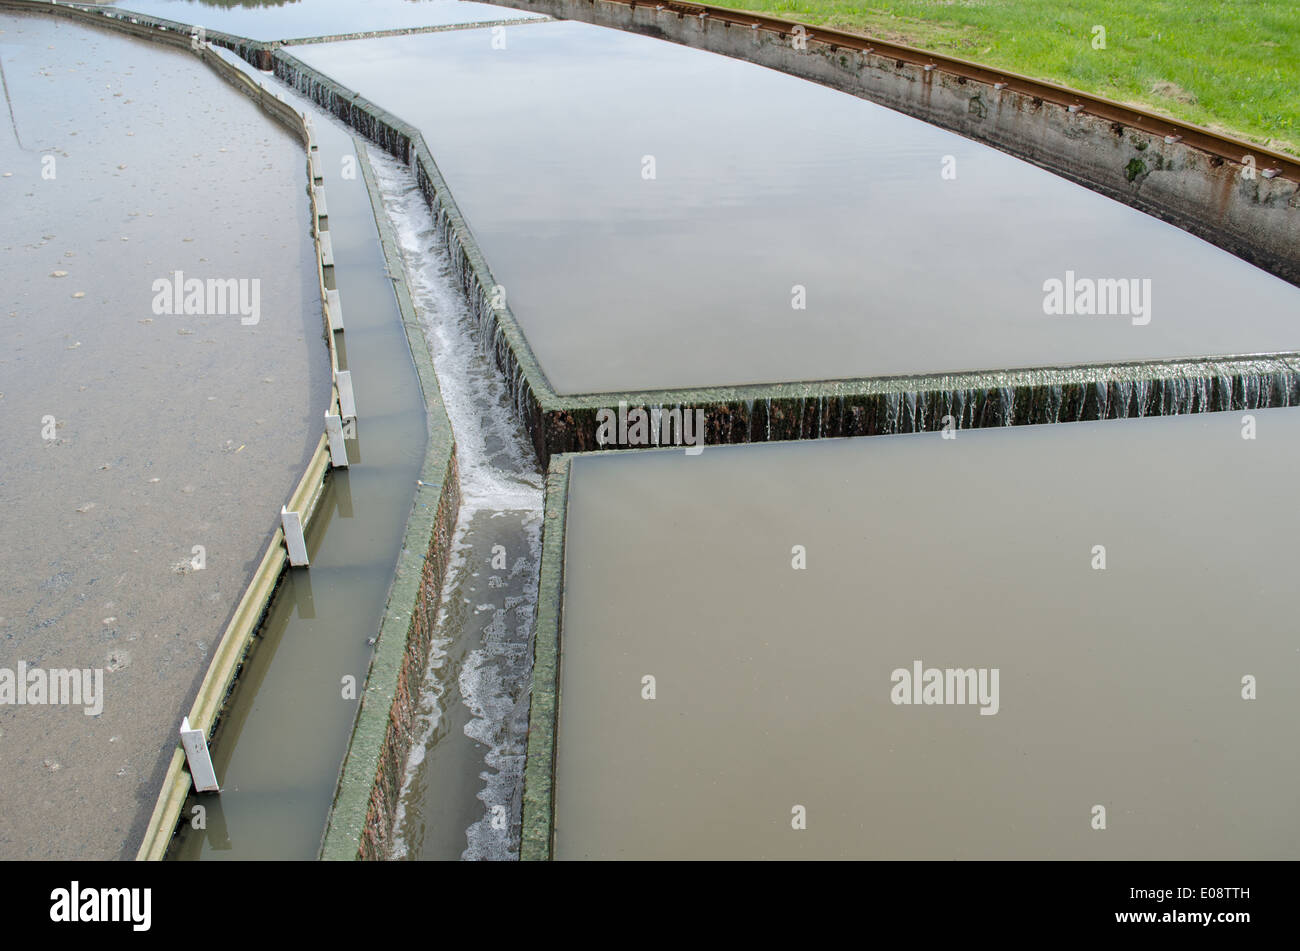 Closeup of water flow filtration sedimentation stage in water treatment facility plant equipment. Stock Photo